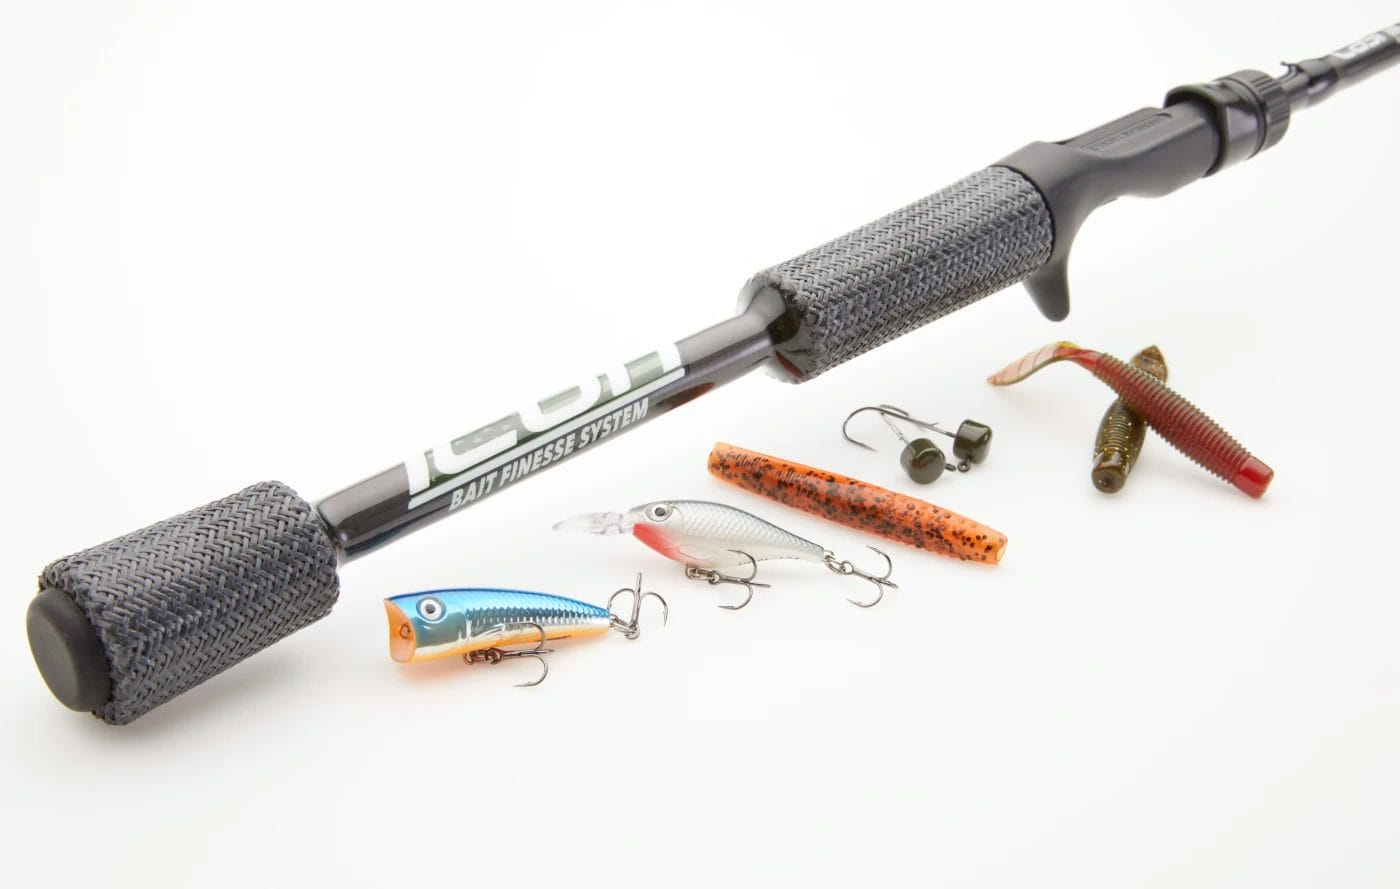 BUYER'S GUIDE: BFS (BAIT FINESSE SYSTEM) RODS, REELS, AND TACKLE 